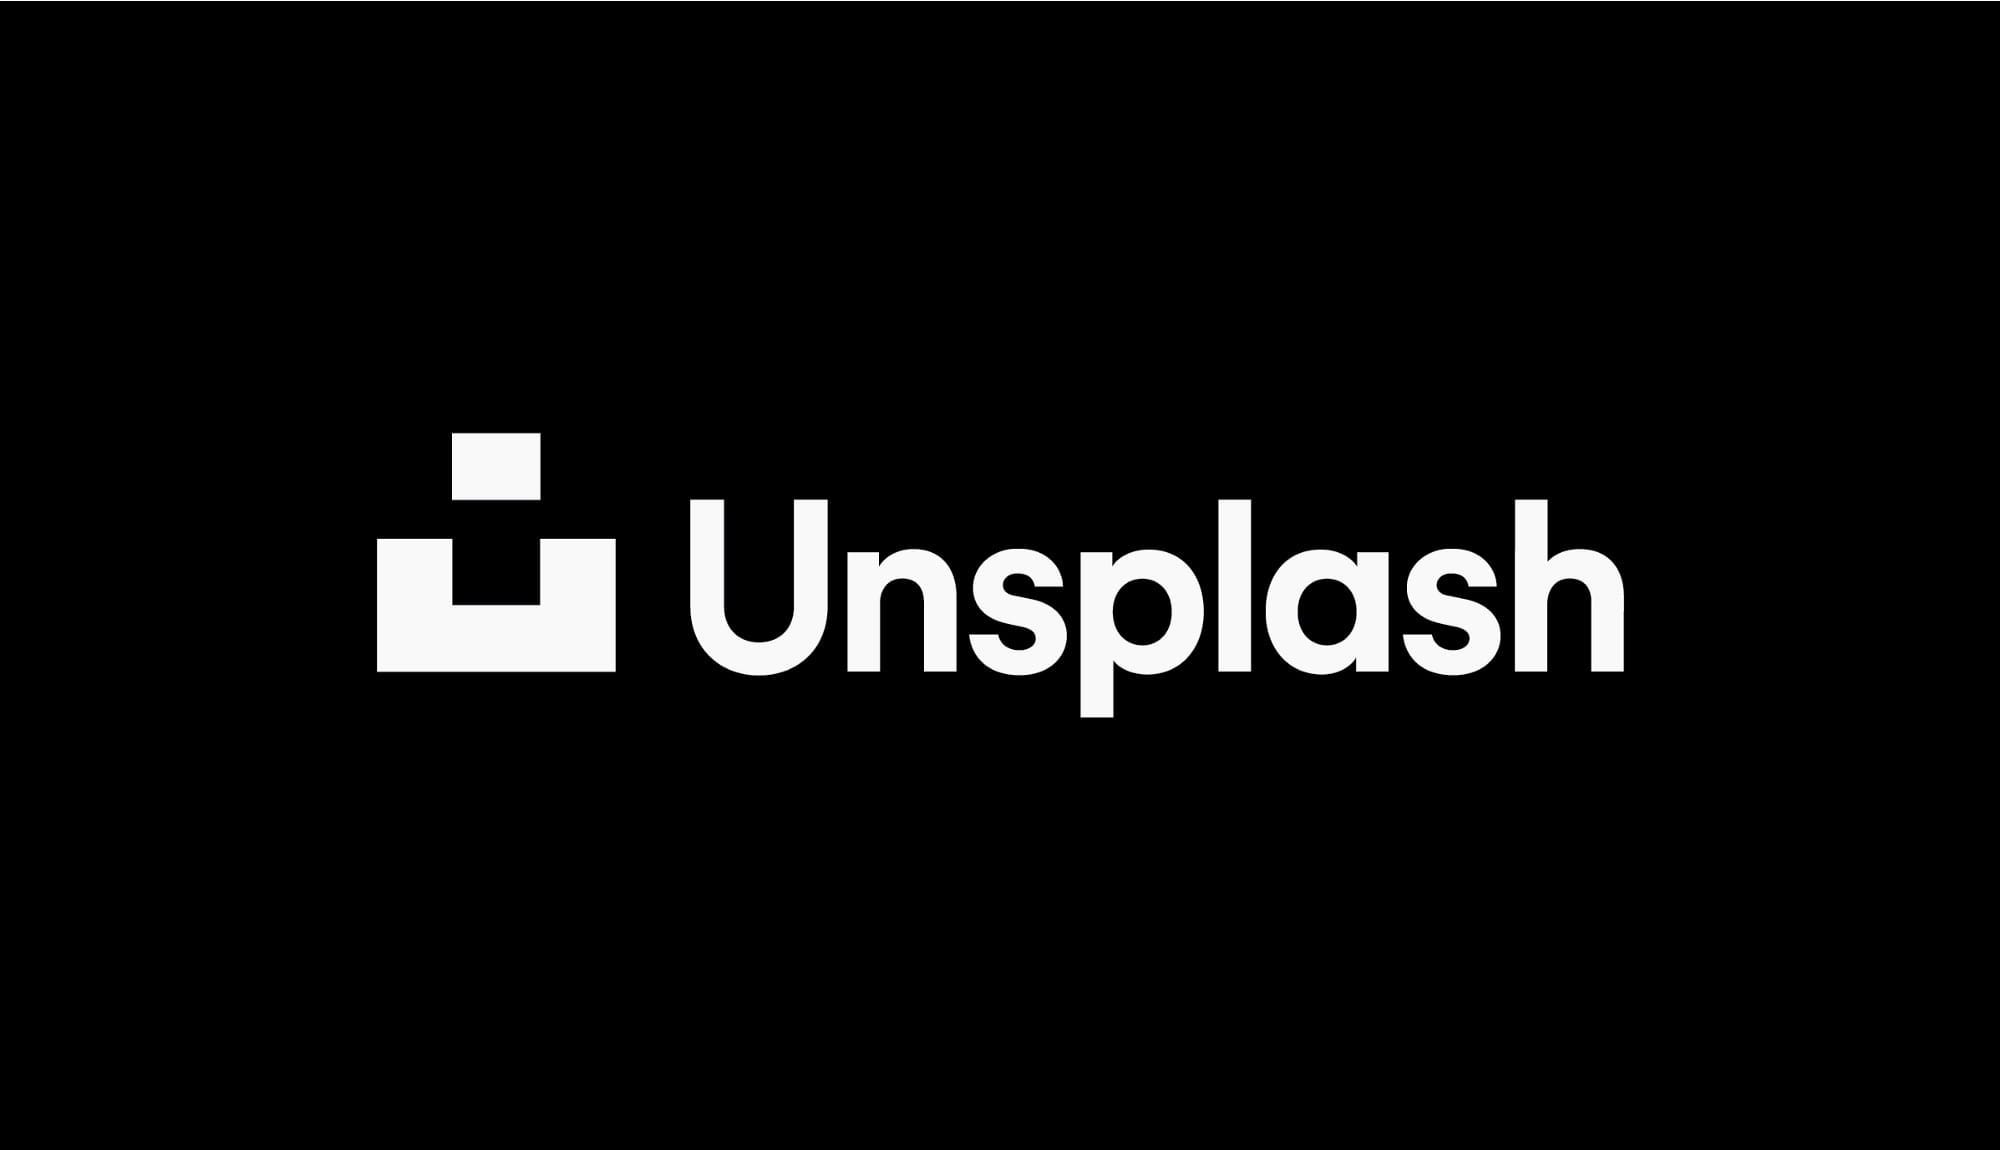 Unsplash is a website dedicated to proprietary stock photography. Since 2021, it has been owned by Getty Images. The website claims over 330,000 contributing photographers and generates more than 13 billion photo impressions per month on their growing library of over 5 million photos